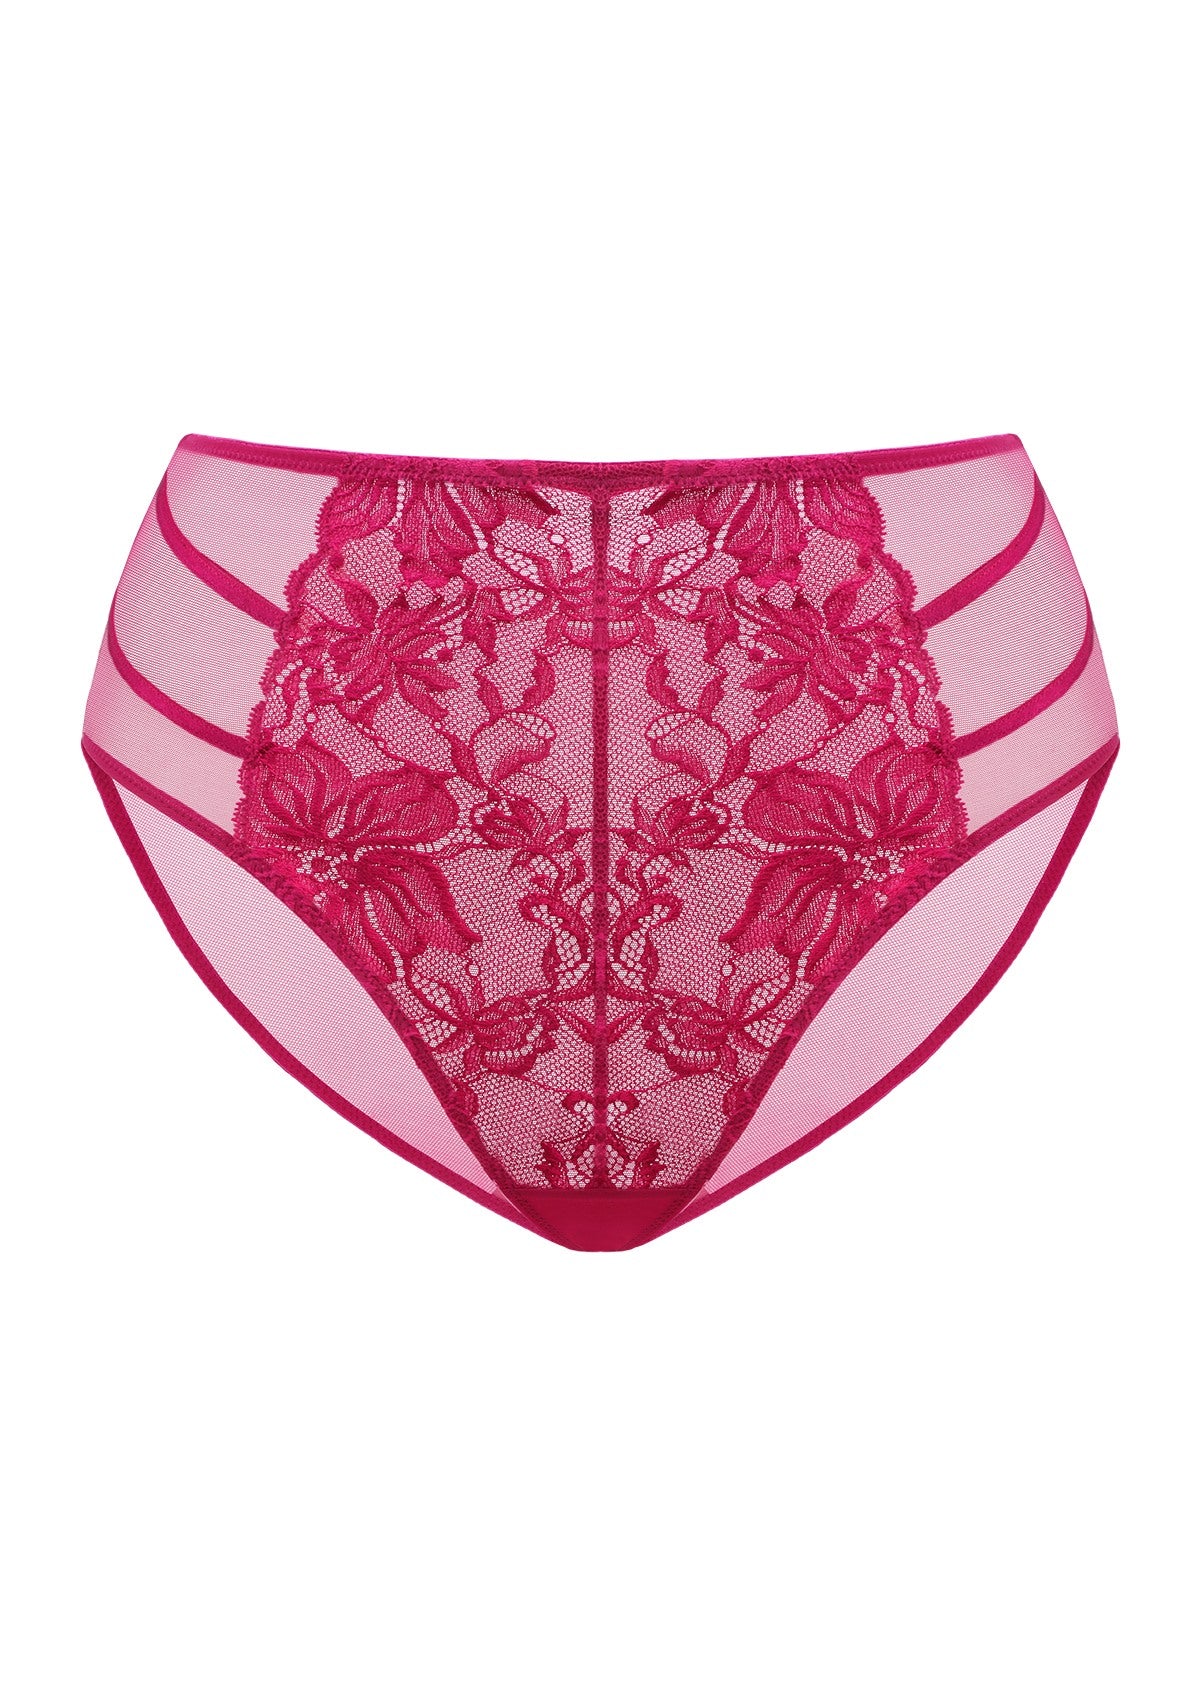 HSIA Pretty In Petals Mid-Rise Sexy Lace Everyday Underwear  - L / High-Rise Brief / Red